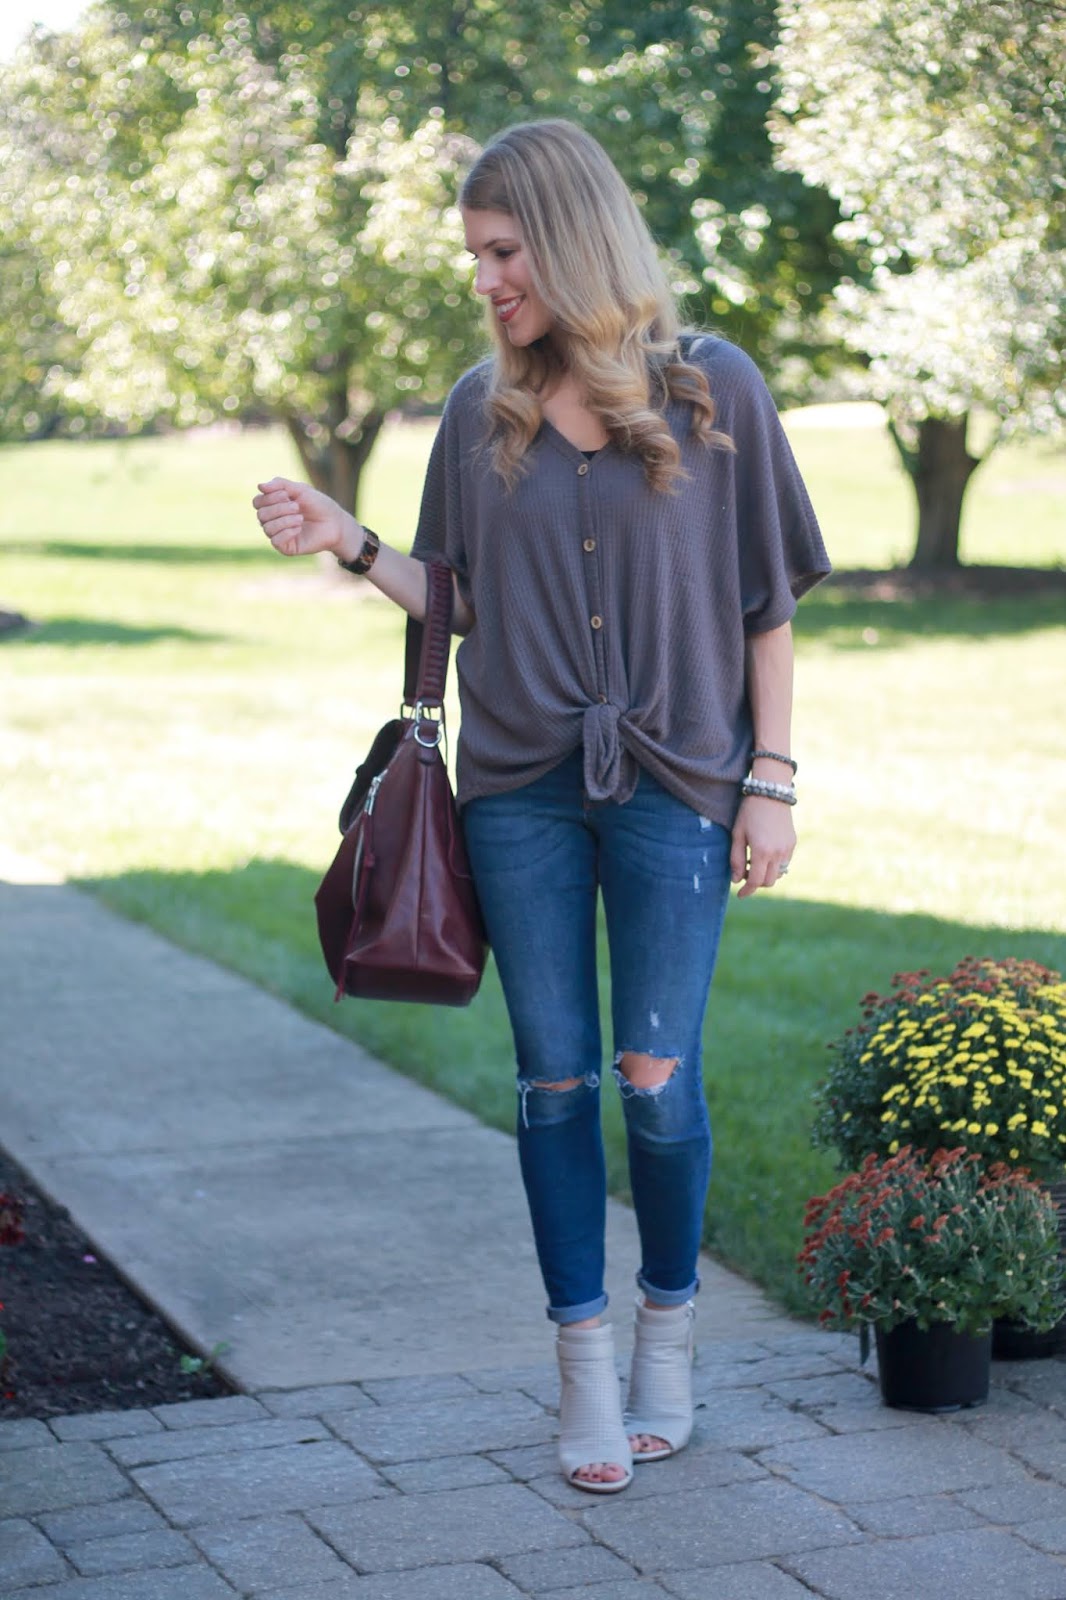 PinkBlush Tie Front Top & Confident Twosday Linkup - I do deClaire